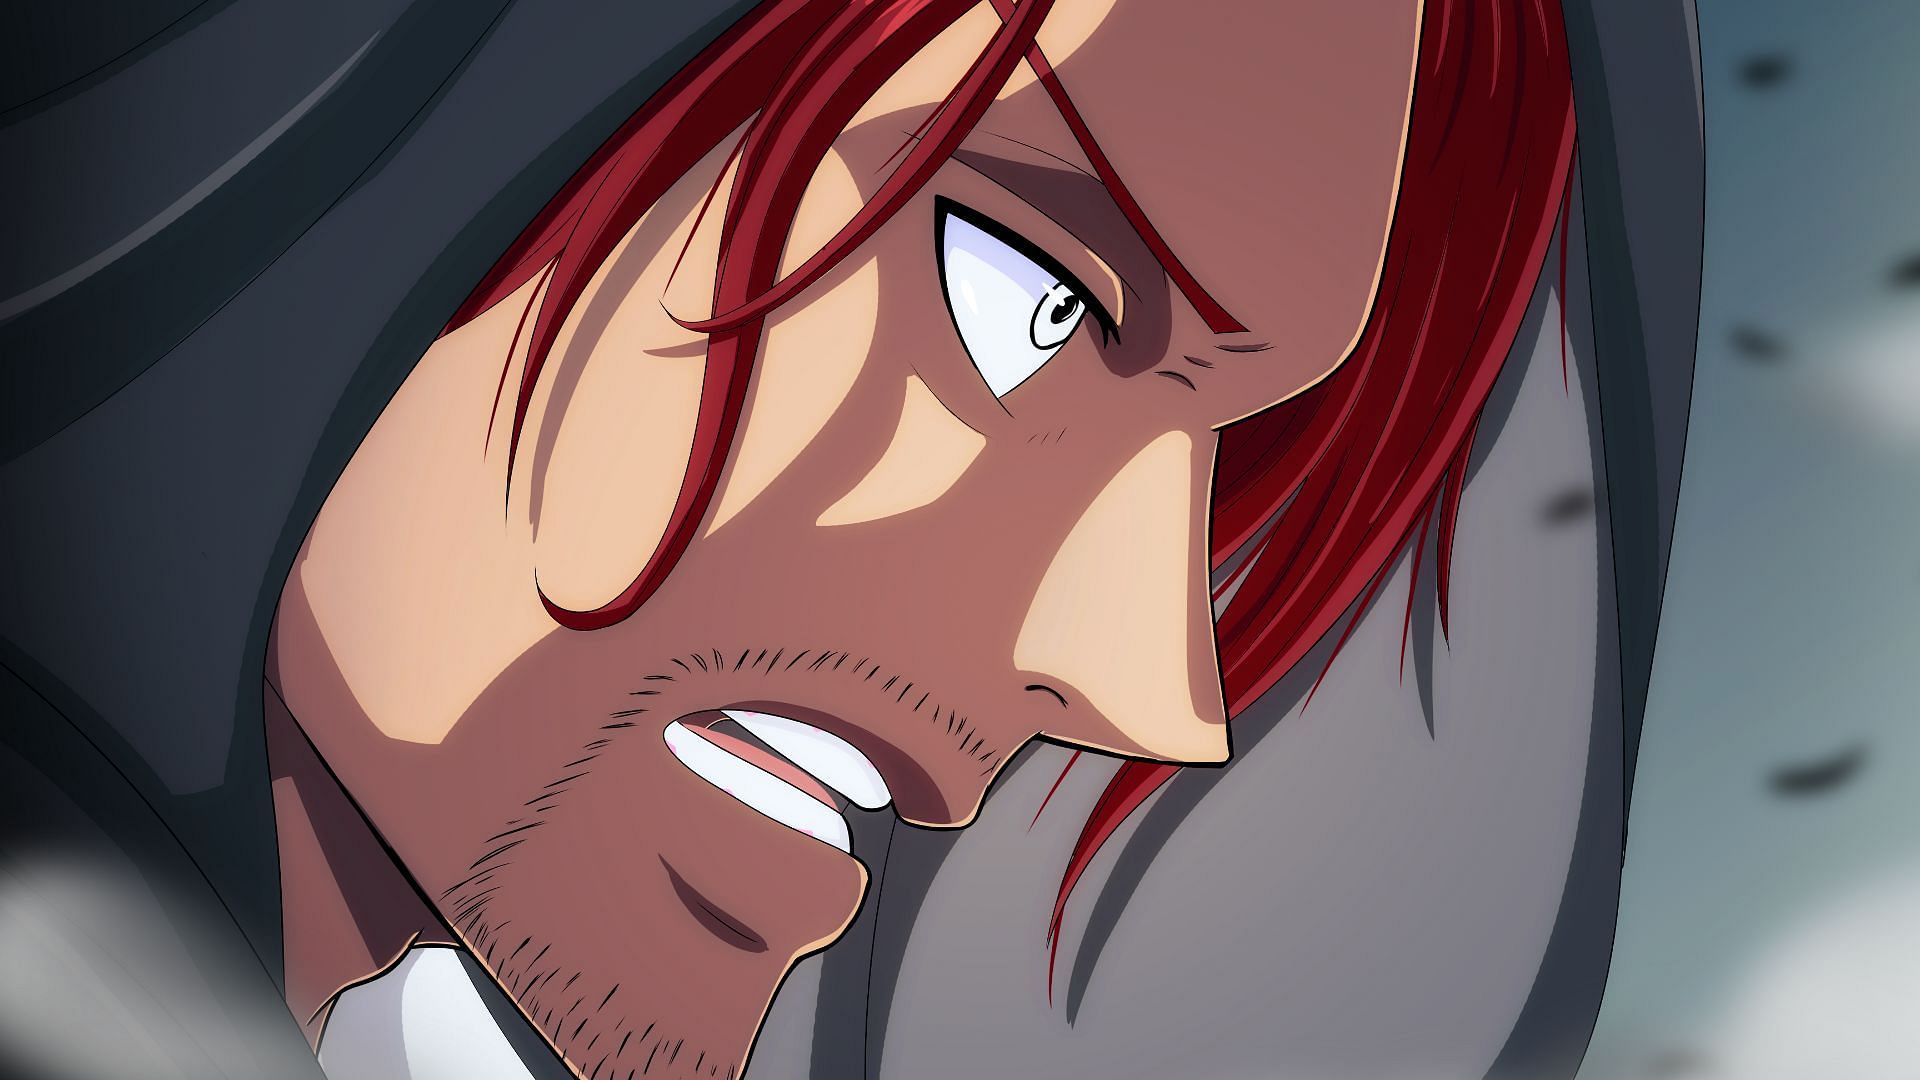 5. Shanks from One Piece - wide 8